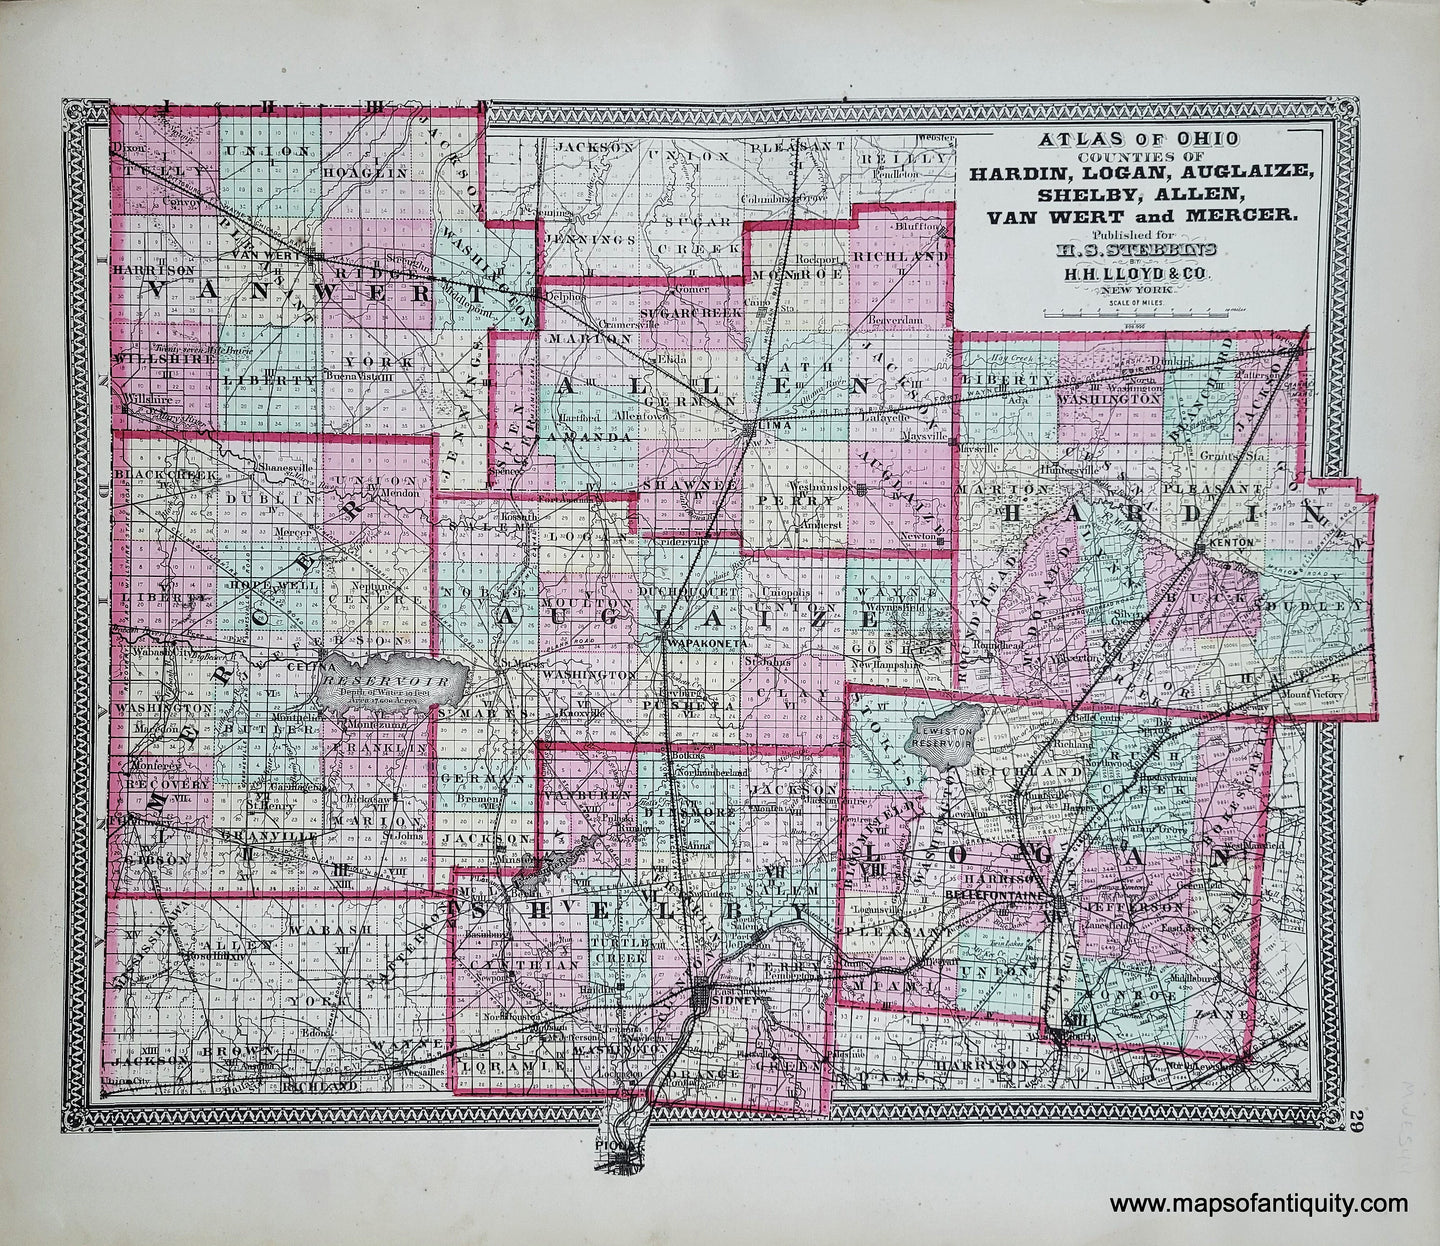 Genuine-Antique-Hand-colored-Map-Atlas-of-Ohio-Counties-of-Hardin-Logan-Auglaize-Shelby-Allen-Van-Wert-and-Merger-1868-Stebbins-Lloyd-Maps-Of-Antiquity